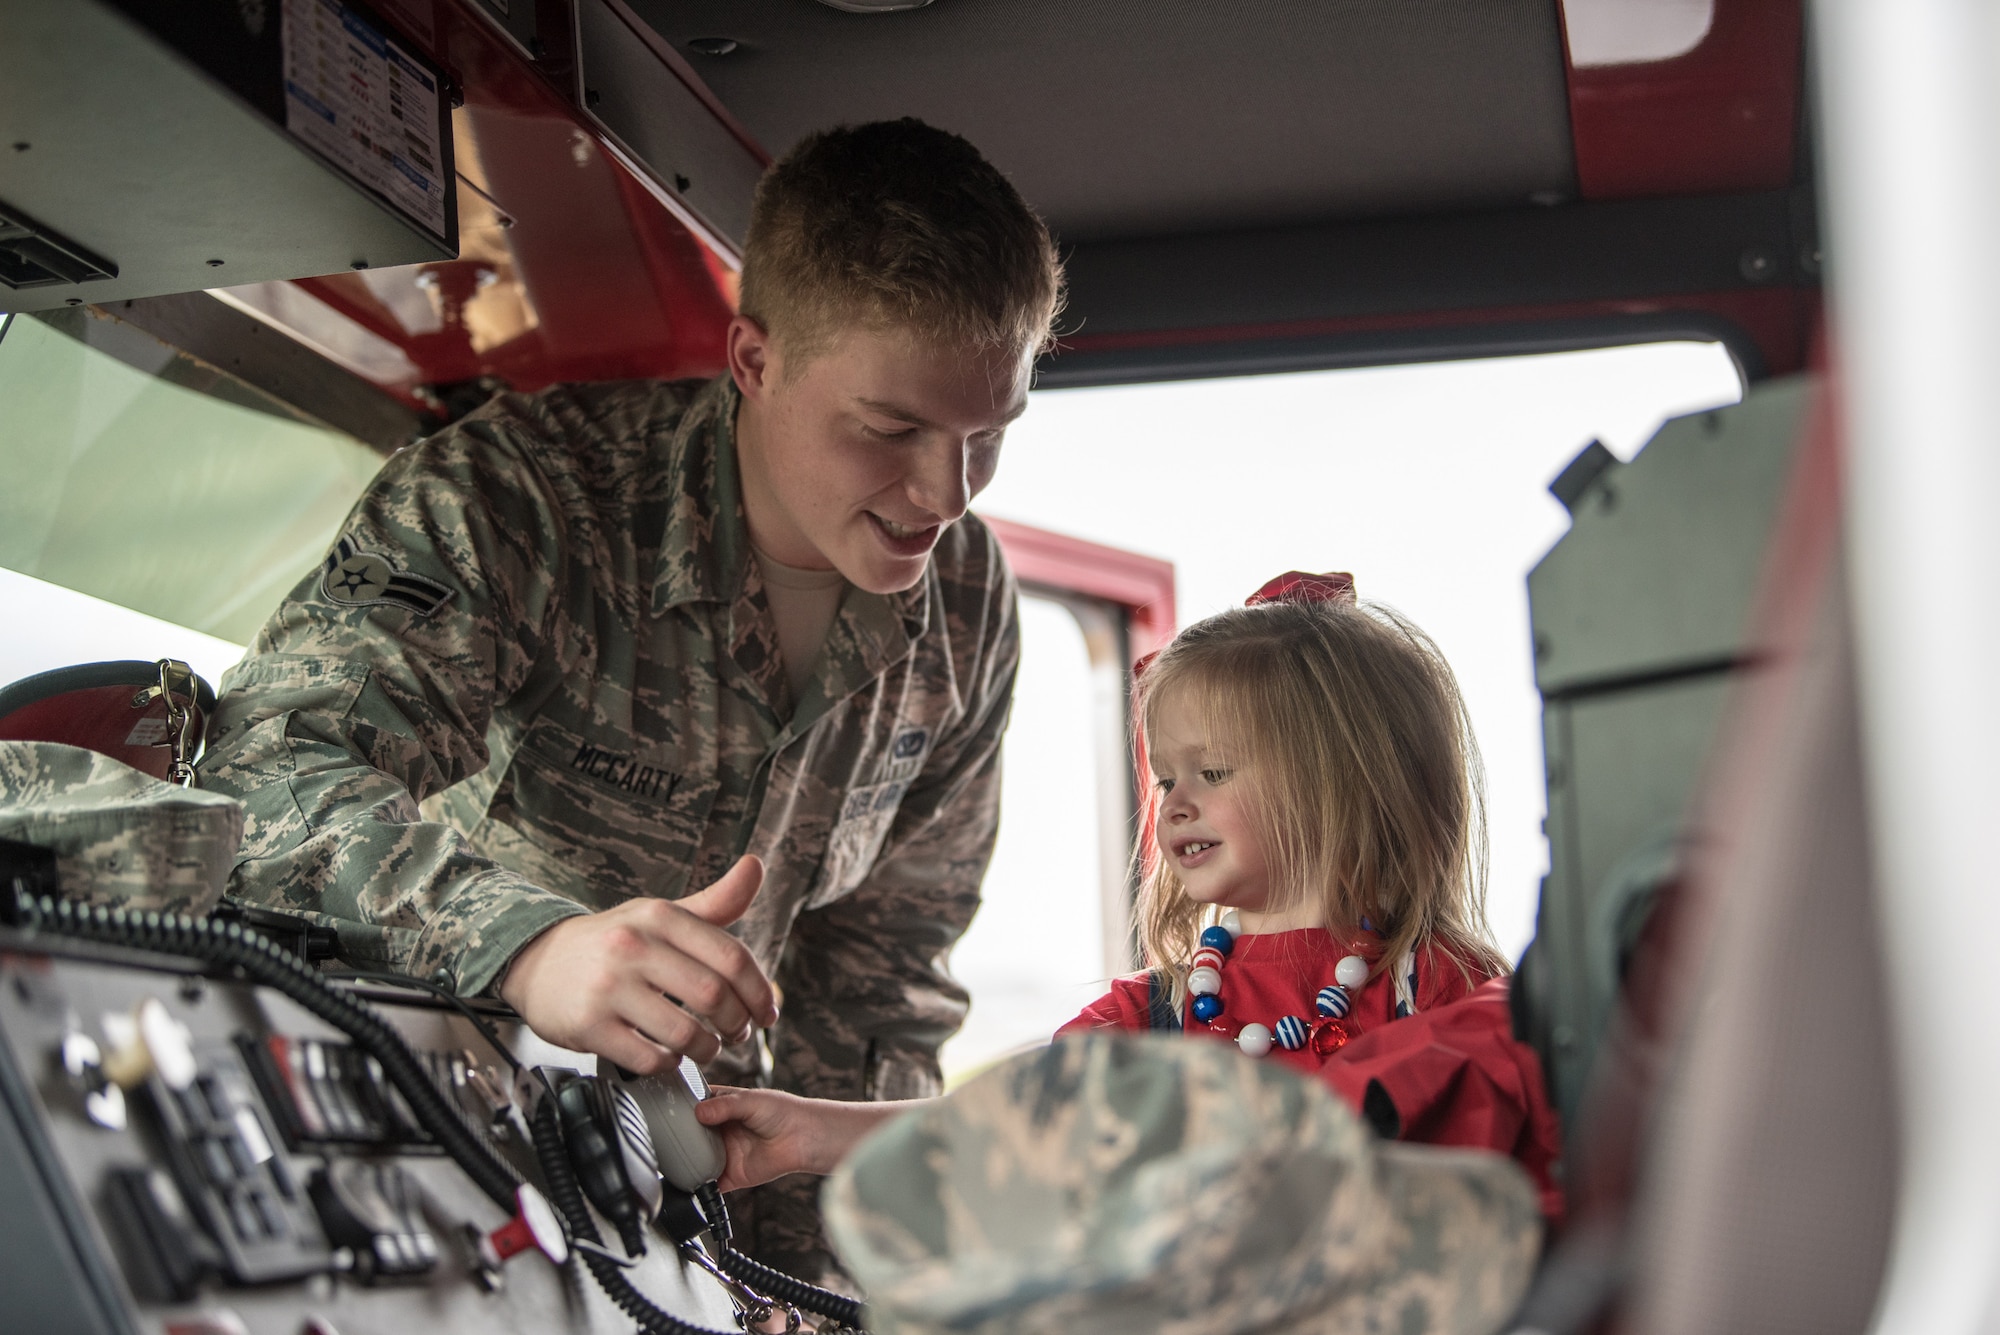 Airman 1st Class Benjamin McCarty, a firefighter assigned to the 123rd Civil Engineer Squadron, shows the unit’s fire truck to Ruby Johnson, daughter of the Kentucky Air National Guard’s Christopher Johnson, during Family Day at the Kentucky Air National Guard Base in Louisville, Ky., Sept. 16, 2018. The event, which was sponsored by the Airman and Family Readiness Office and the Key Volunteer Group, featured a car show, a static-display C-130 Hercules aircraft and several other activities. (U.S. Air National Guard photo by Master Sgt. Phil Speck)